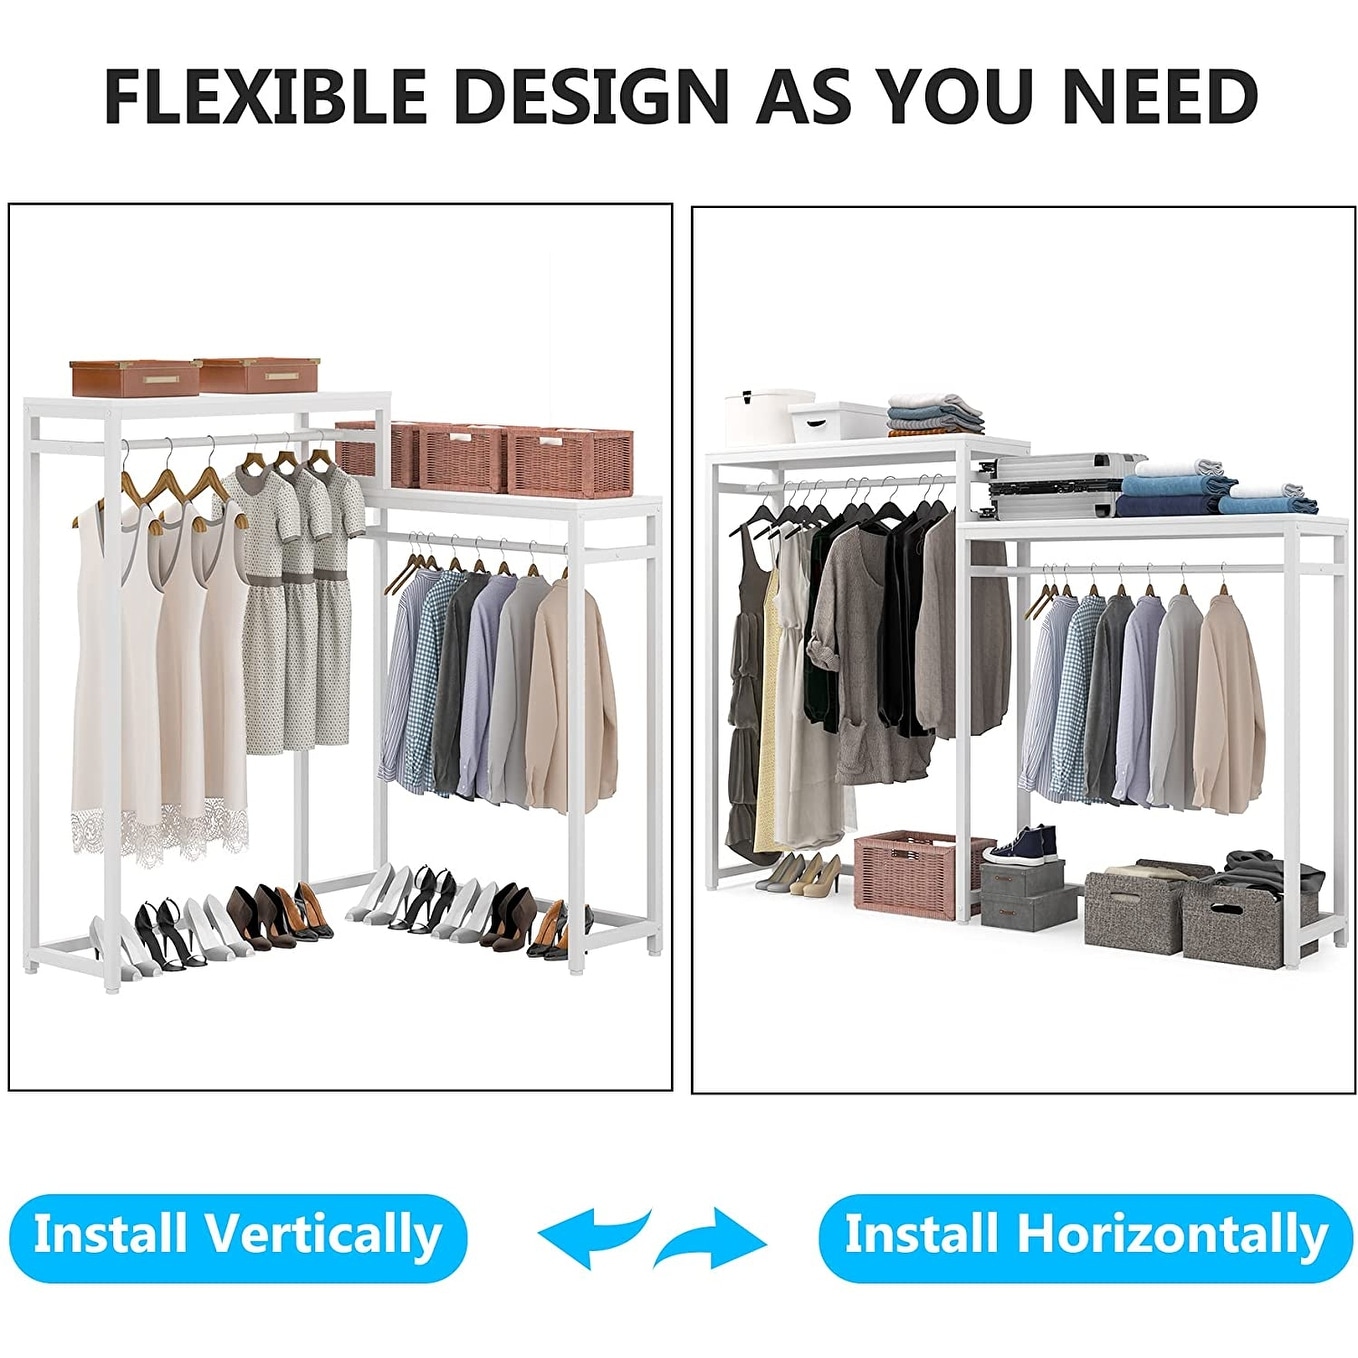 https://ak1.ostkcdn.com/images/products/is/images/direct/49bc5a8486a49761084eb43a26e9439fe71e01ae/Heavy-Duty-Metal-Clothes-Garment-Racks-with-Storage-Shelves-and-Double-Hanging-Rod%2CFree-Standing-Closet-Organizer.jpg